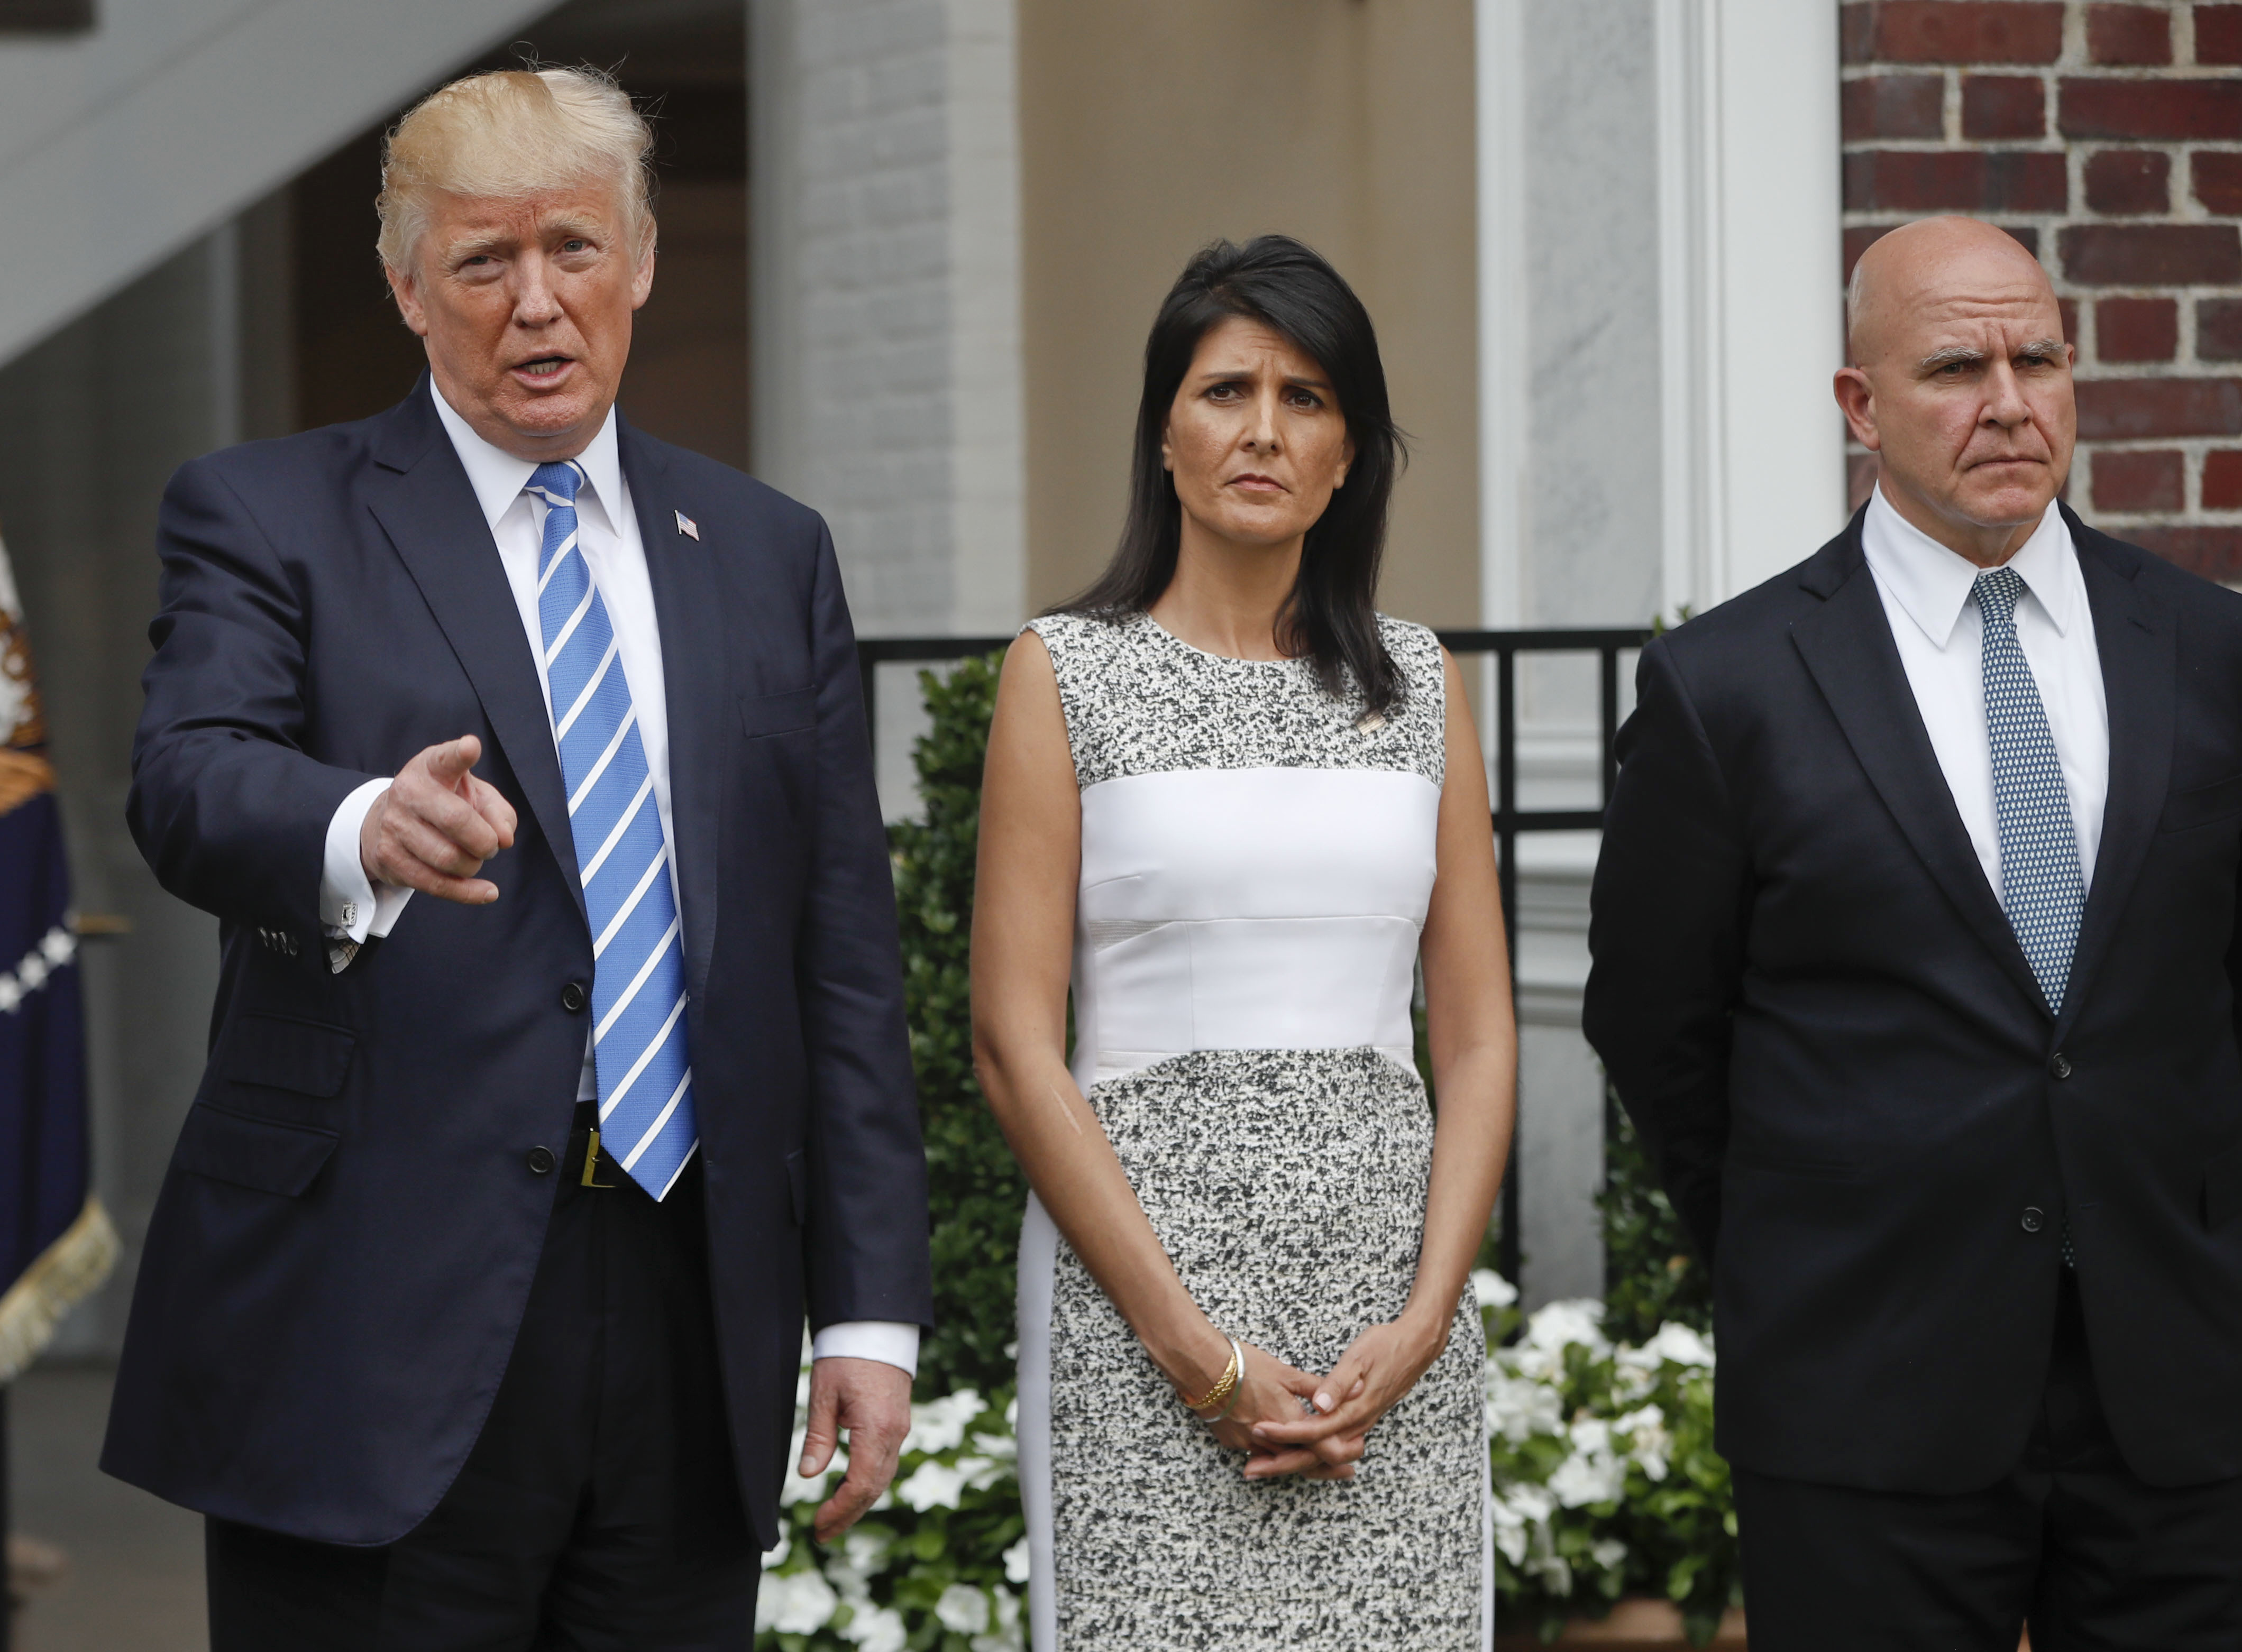 P Trump alongside U.S. Ambassador to the United Nations Nikki Haley and national security adviser H.R. McMaster at Trump National Golf Club in Bedminster, N.J., on Aug. 11, 2017. (Pablo Martinez Monsivai—AP)